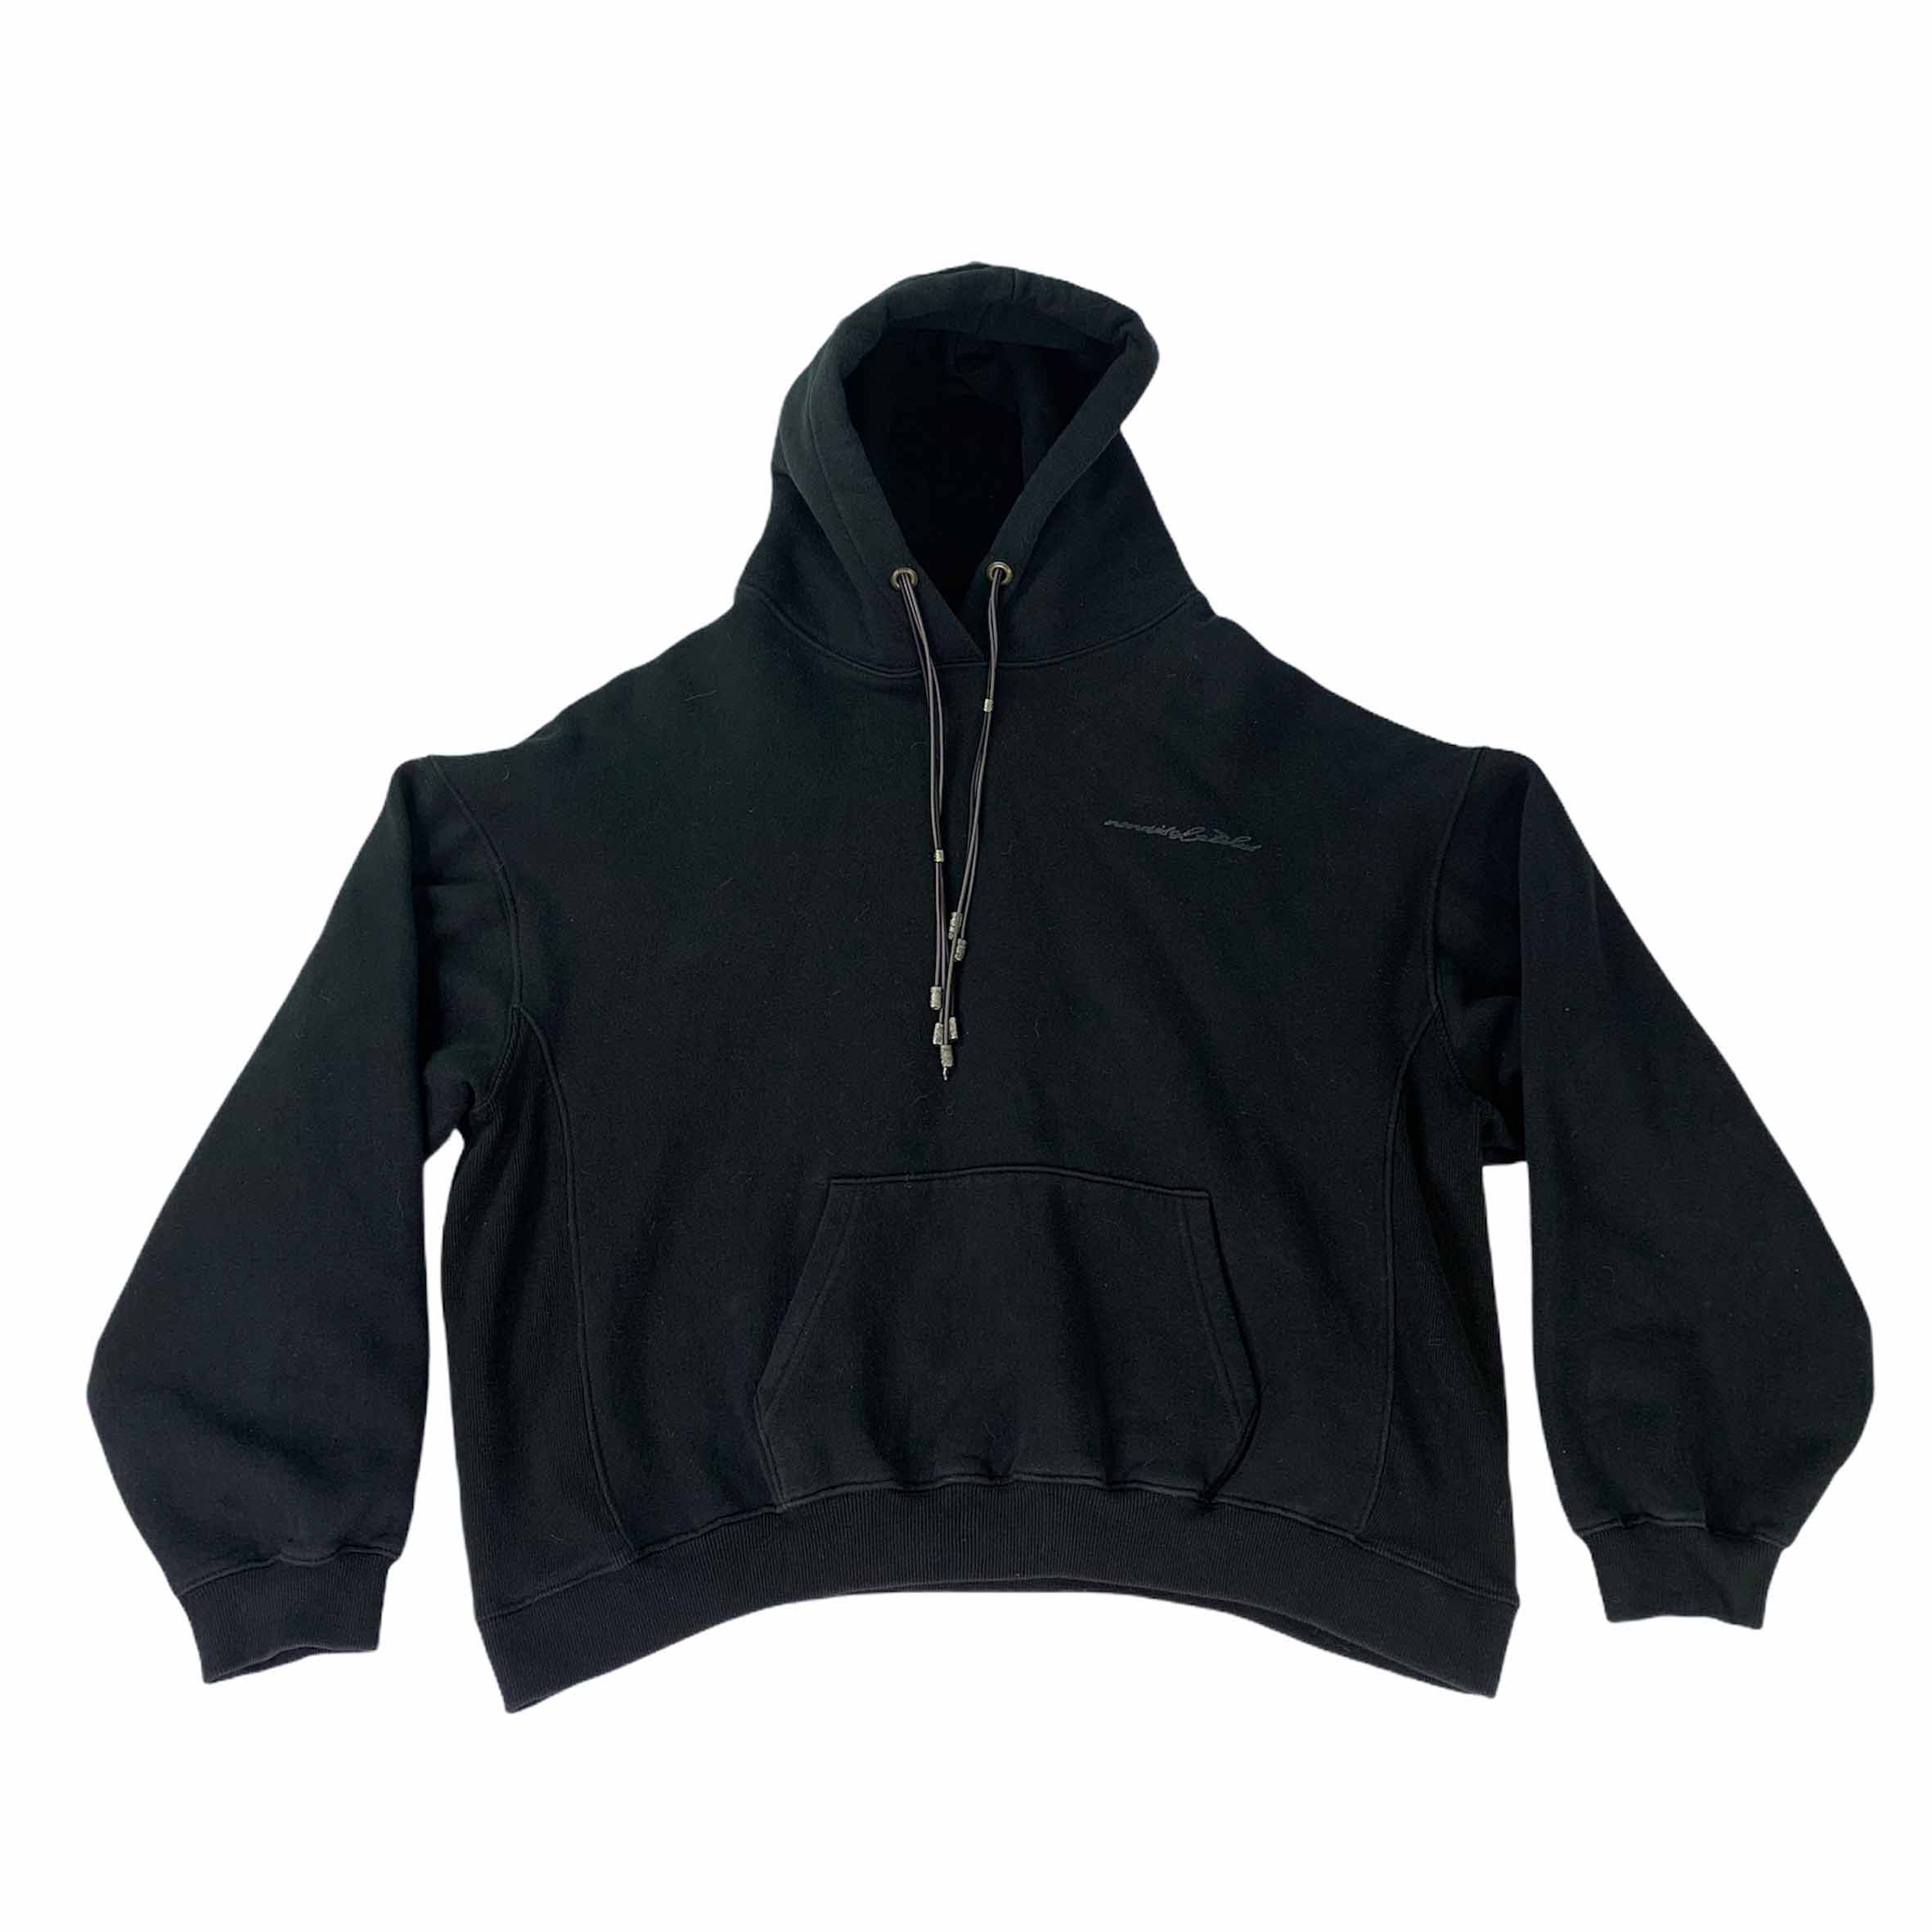 [Nondisclothes] Black Hoodie with Strings - Size L